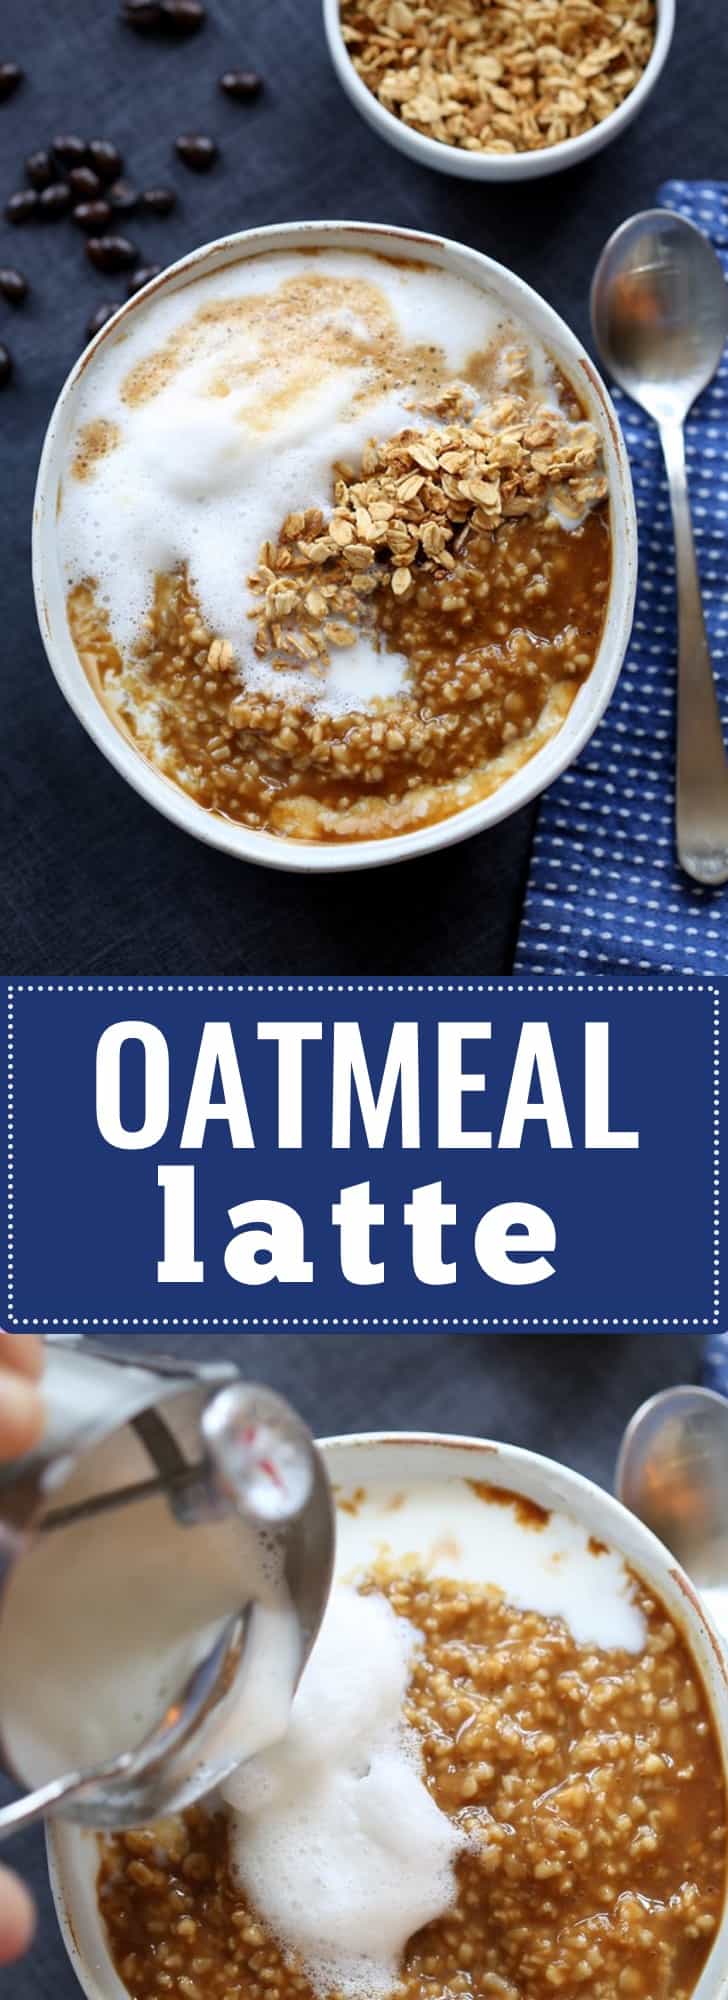 Oatmeal Latte- warm steel cut oats, frothy milk, hot coffee and brown sugar- delicious!